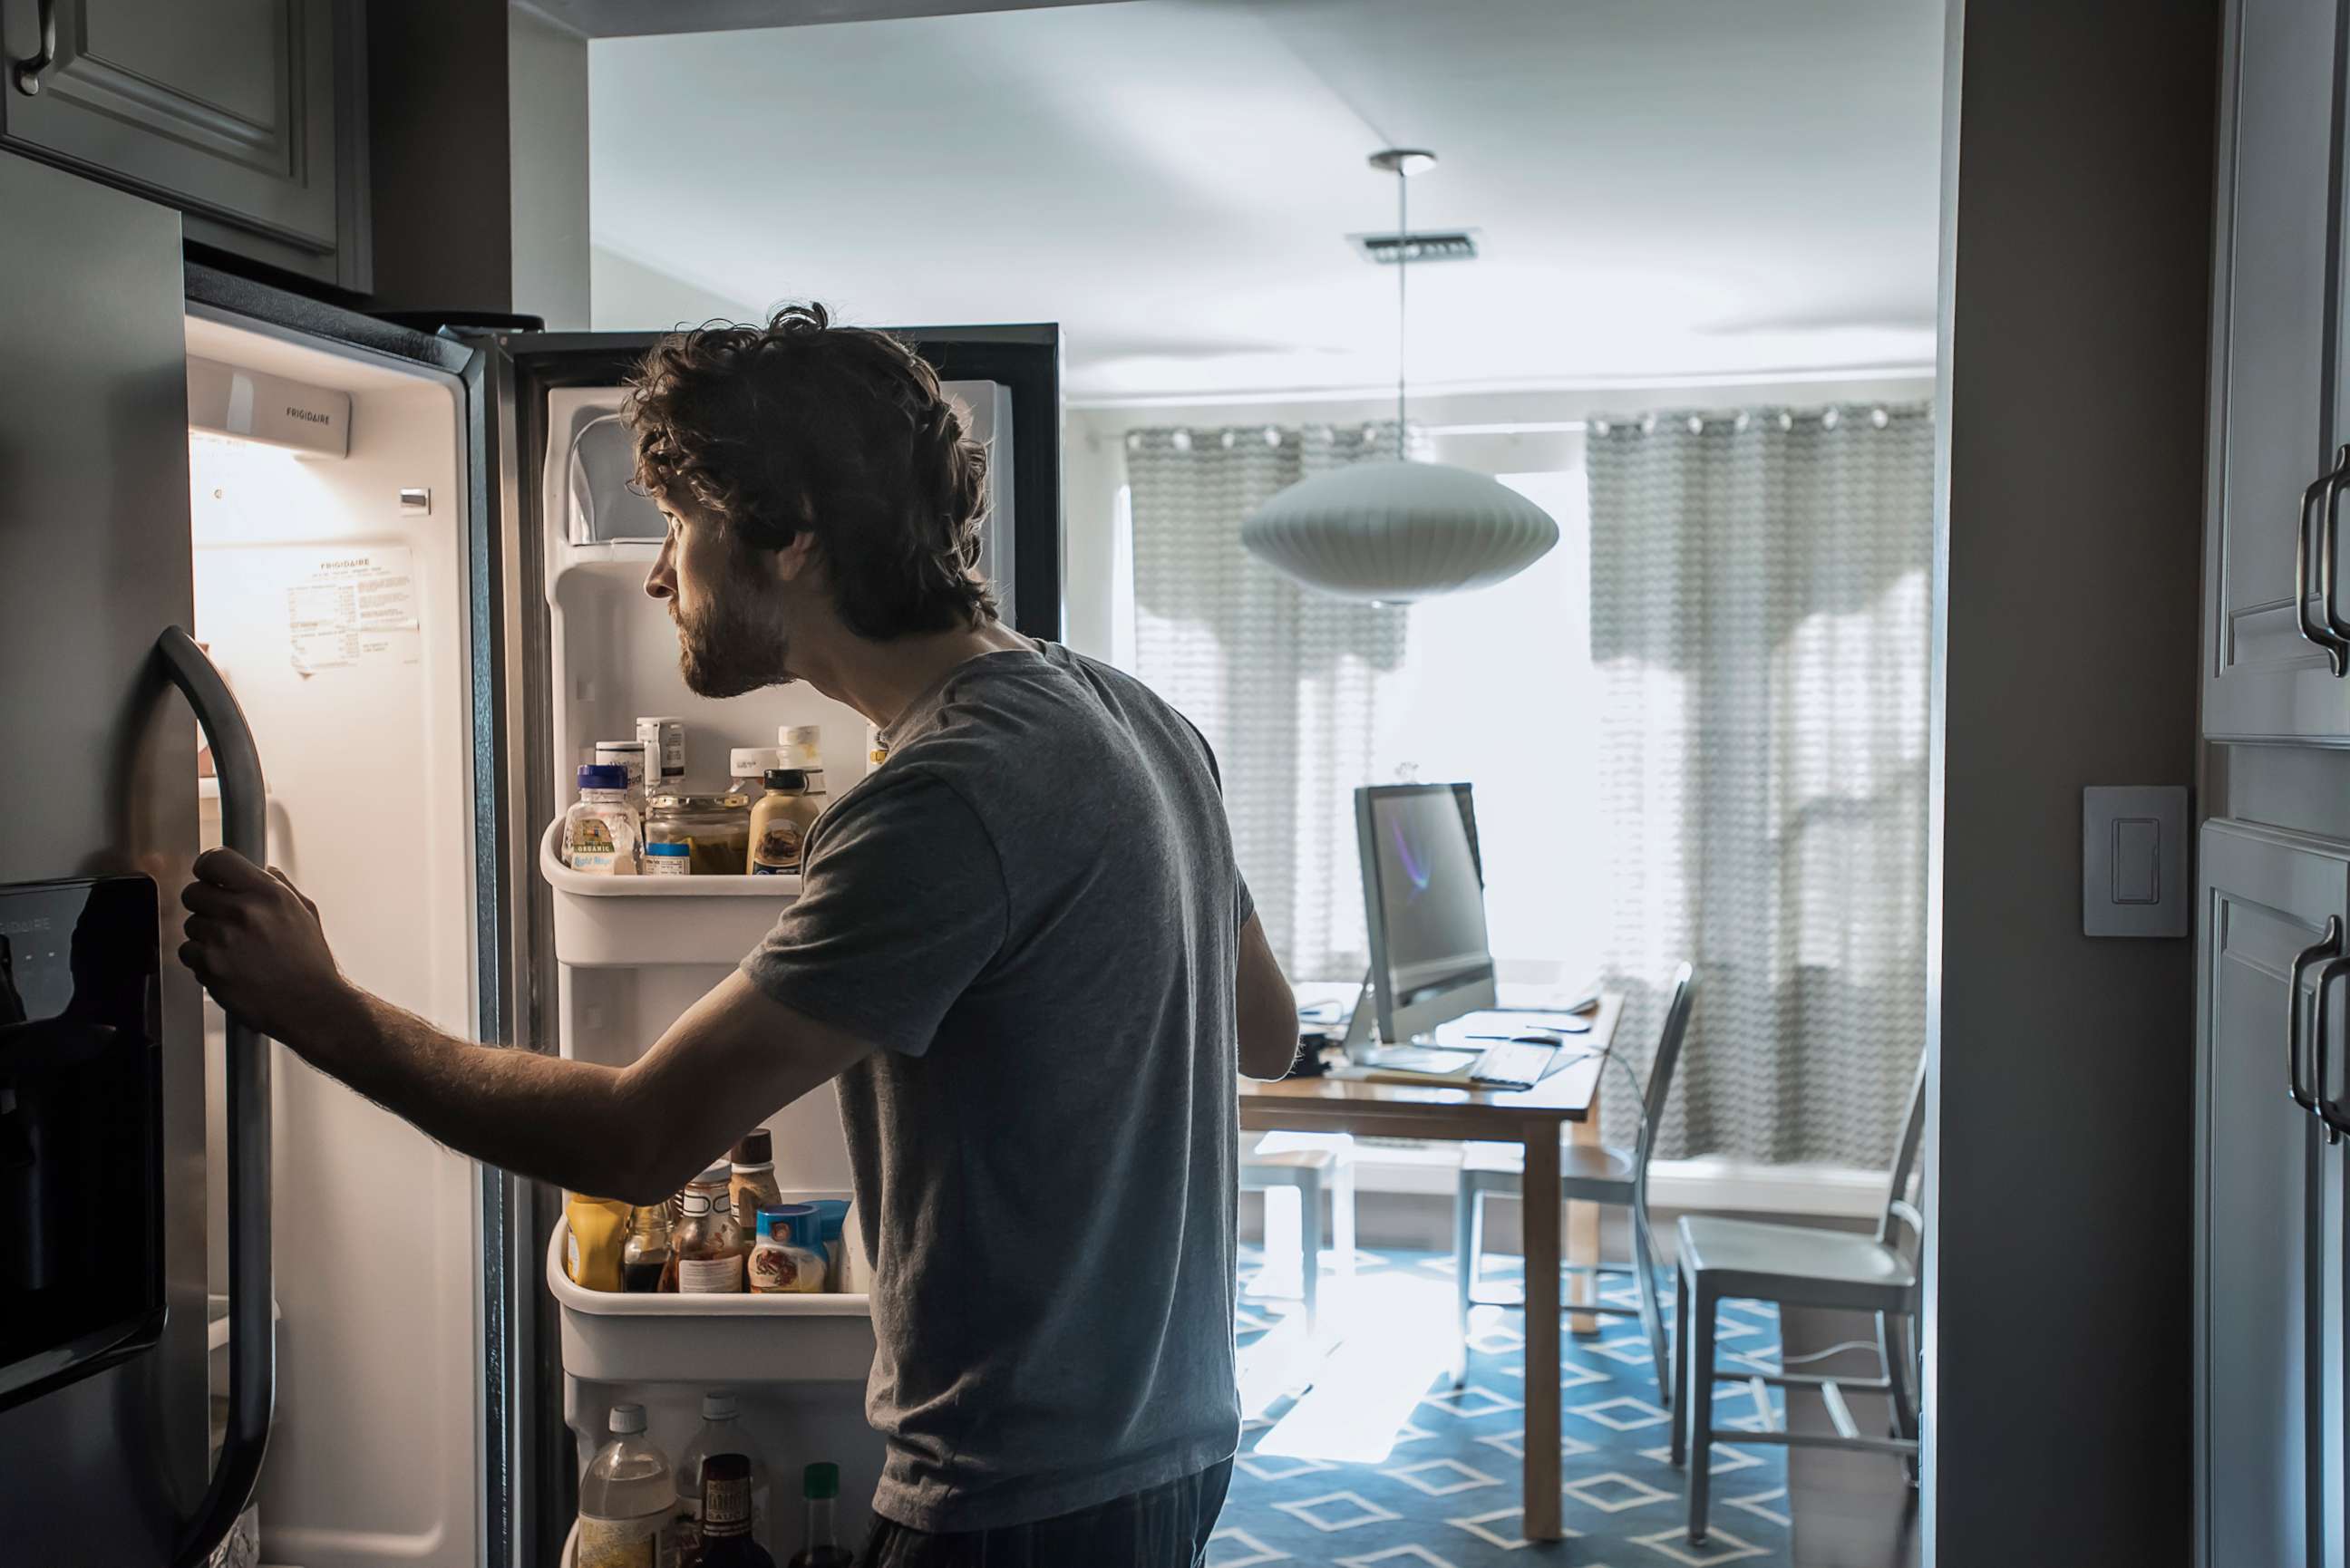 PHOTO: A man looks into a refrigerator in an undated stock photo.